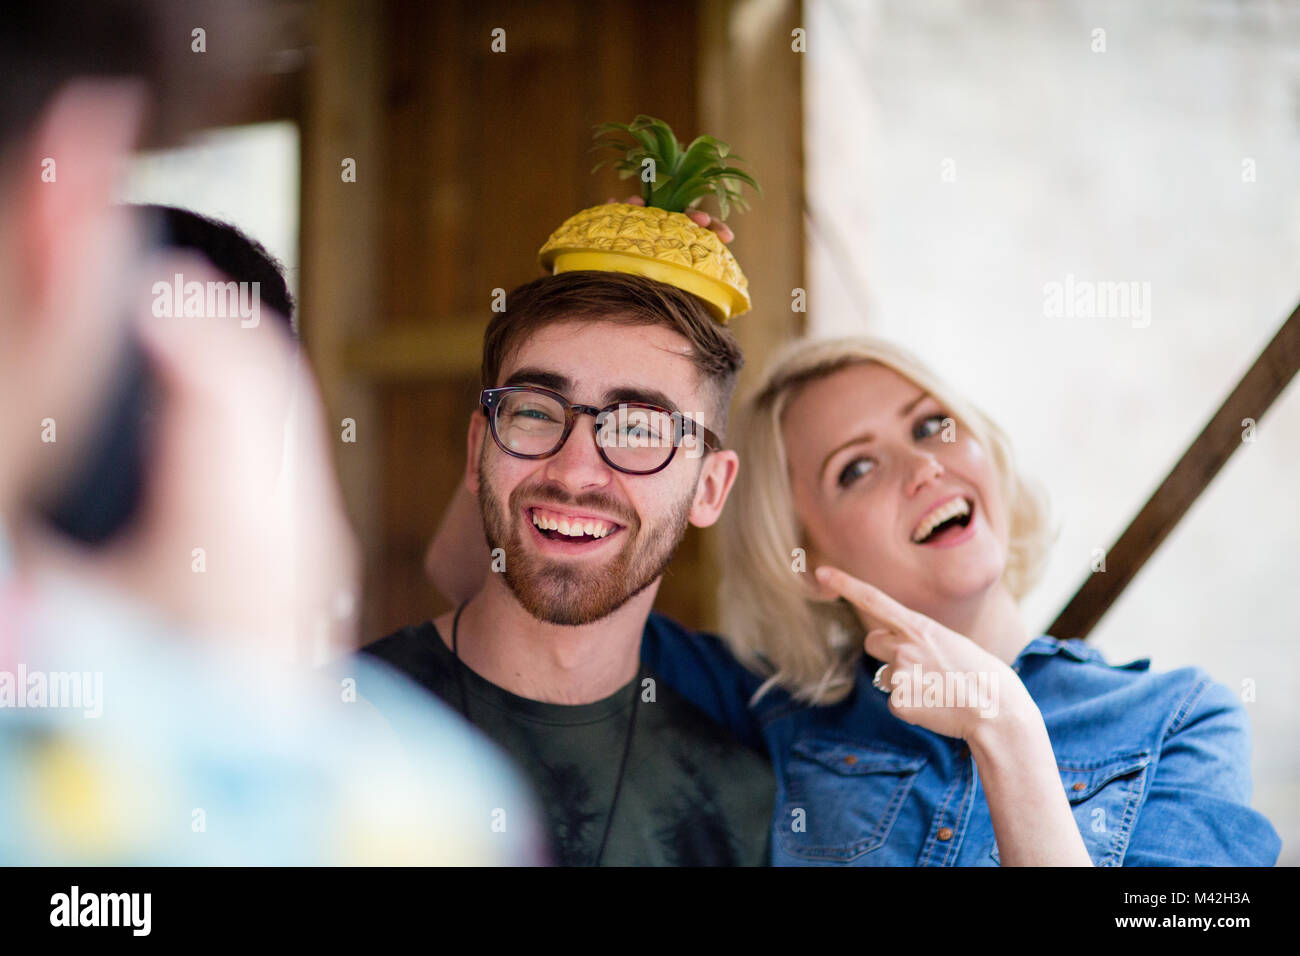 Young adult female mucking around with a friend Stock Photo